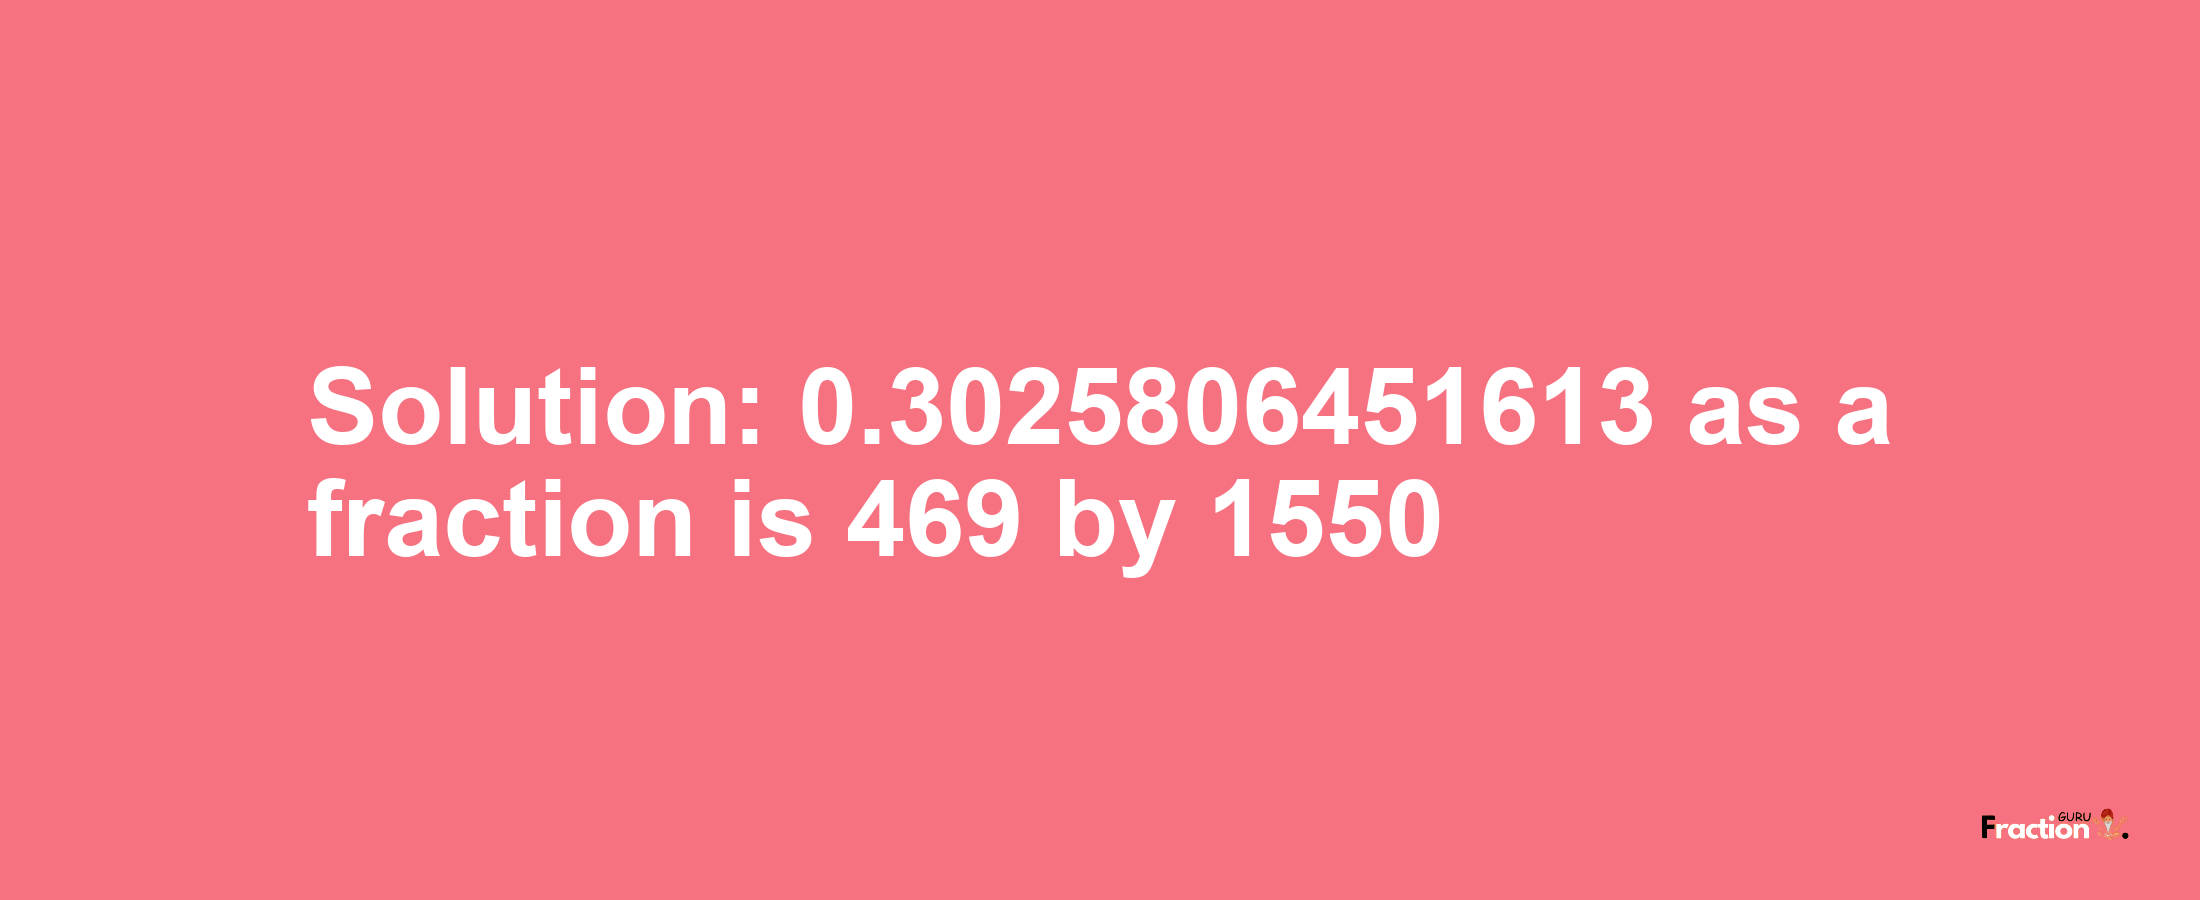 Solution:0.3025806451613 as a fraction is 469/1550